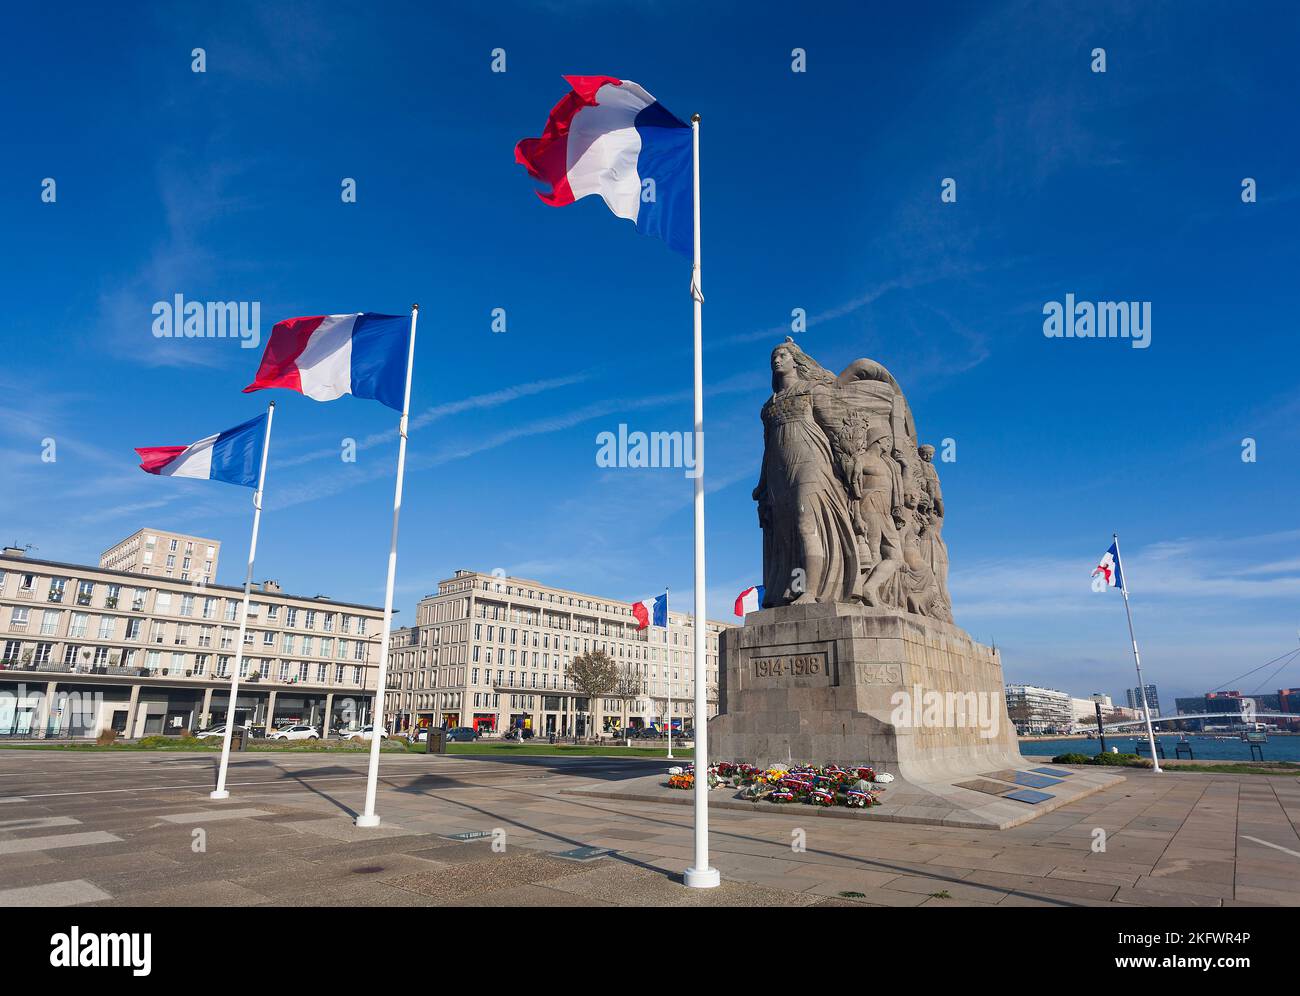 Monument to the deads, Le Havre, Normandy, France Stock Photo